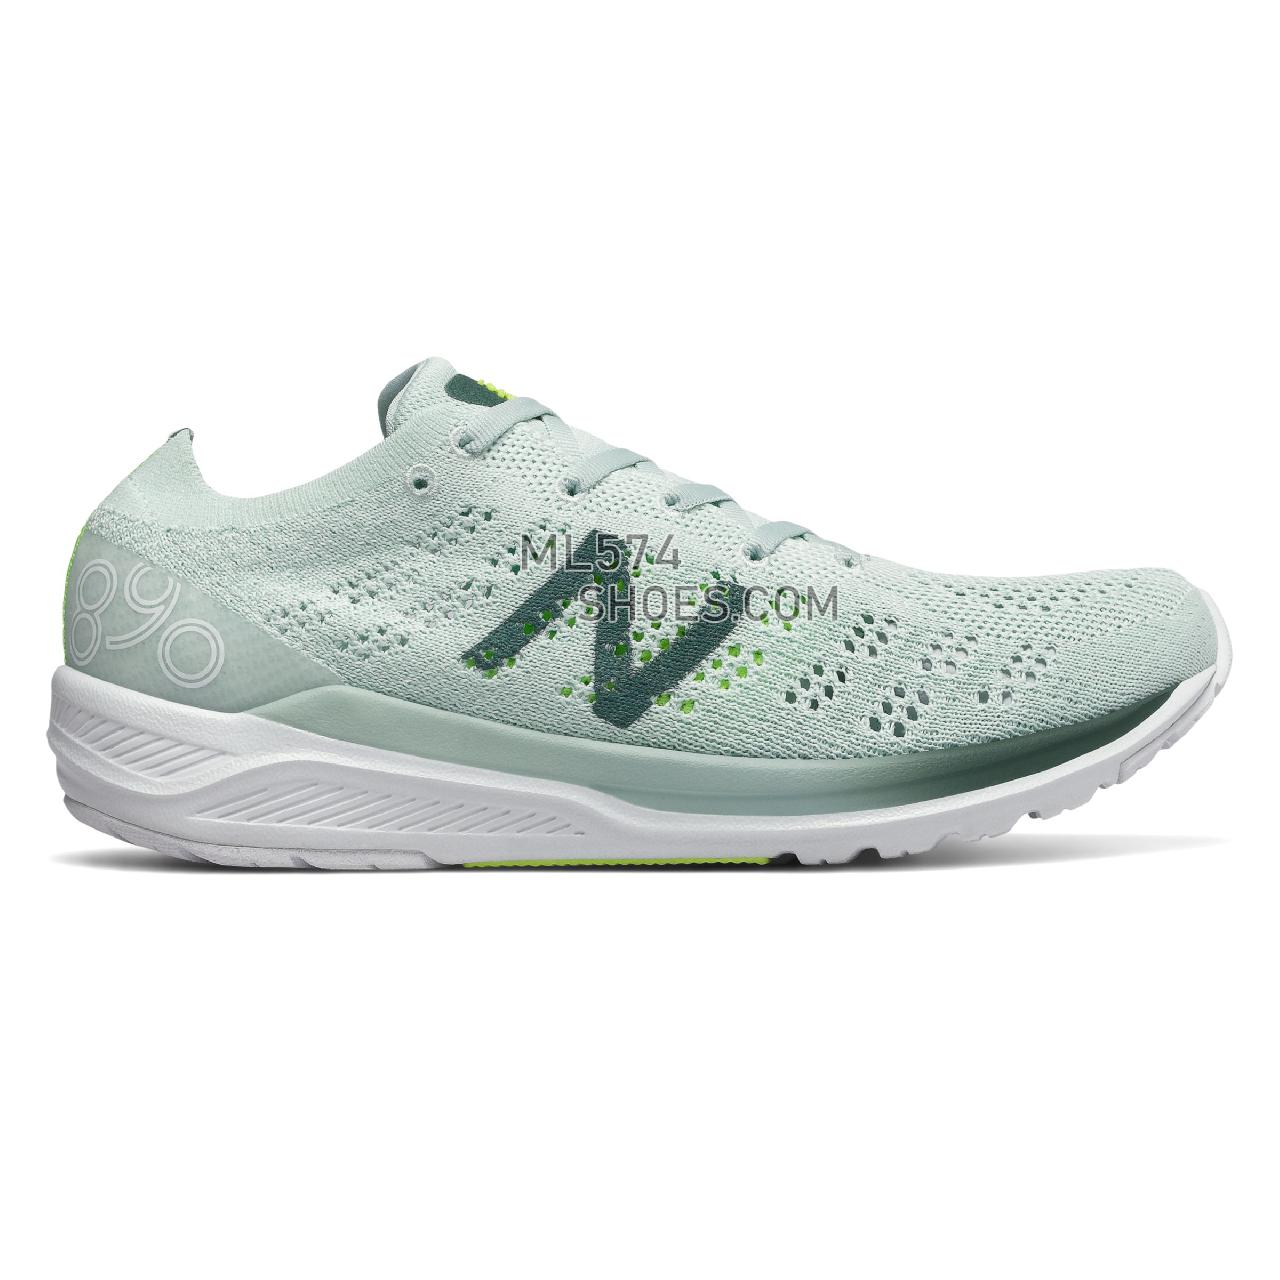 New Balance 890v7 - Women's Neutral Running - Crystal with Dark Agave and Bleached Lime Glo - W890BG7